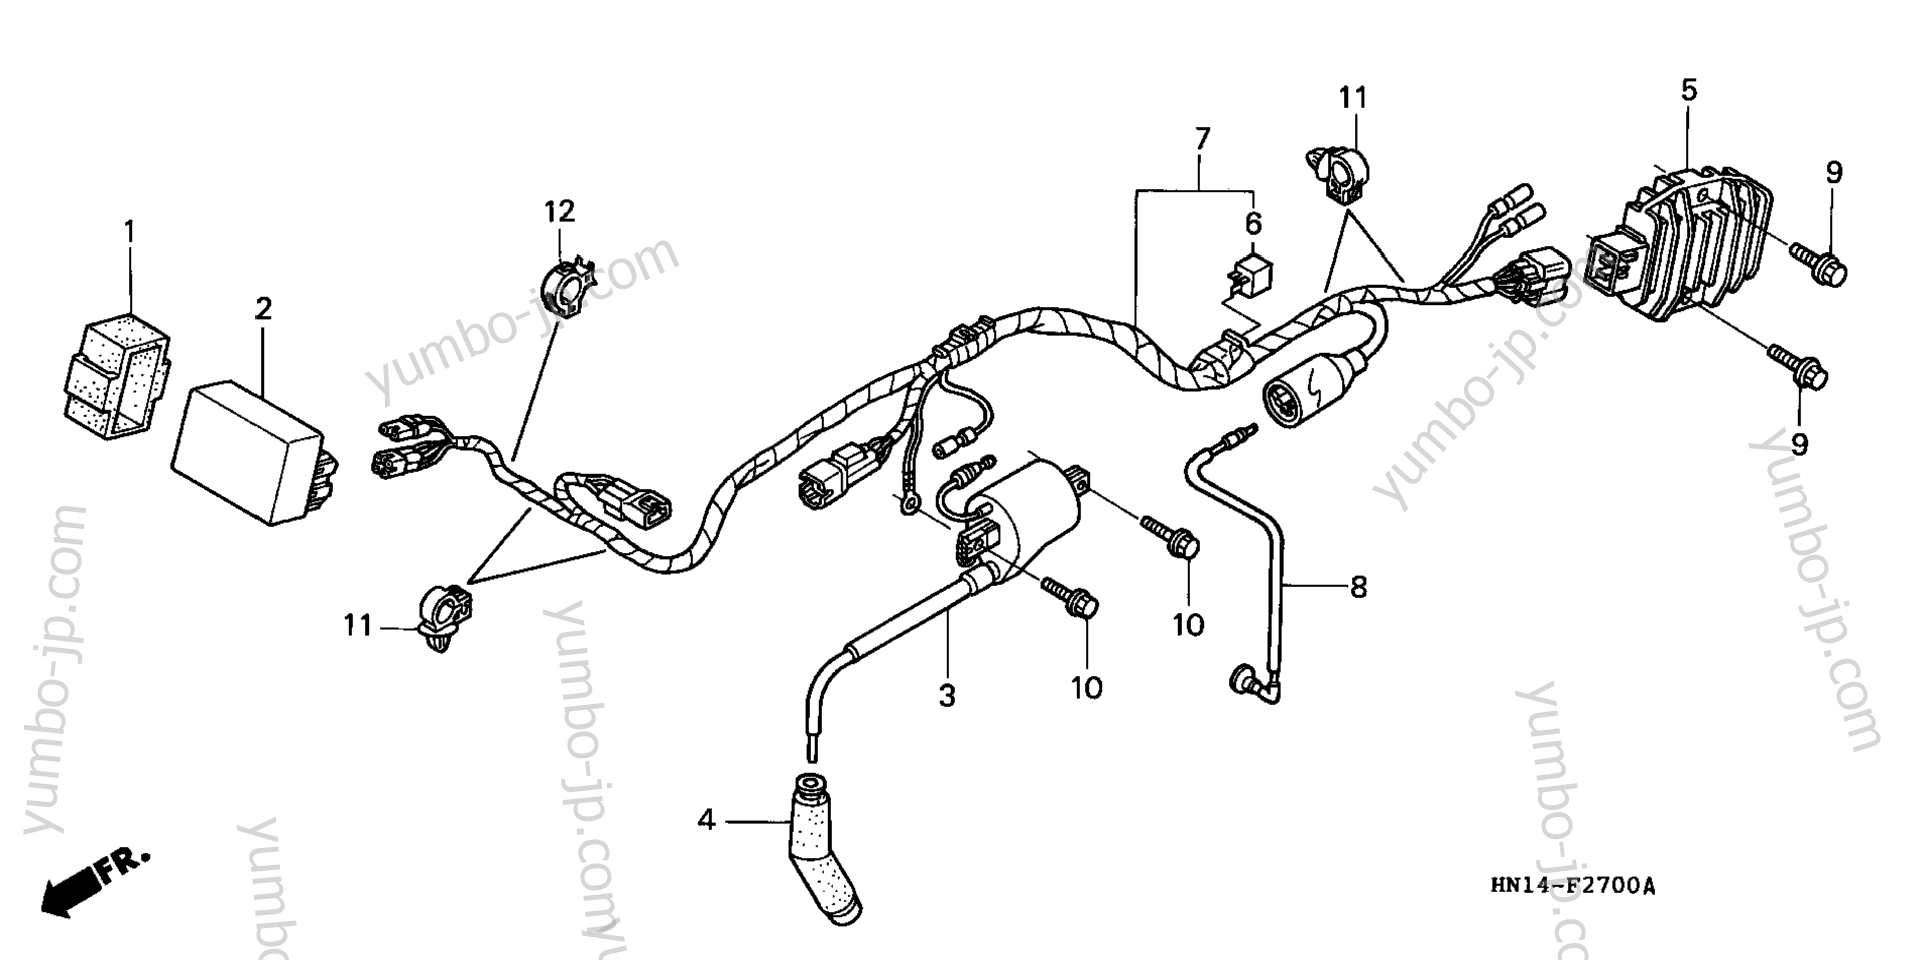 WIRE HARNESS ('99-'04) for ATVs HONDA TRX400EX A 2000 year